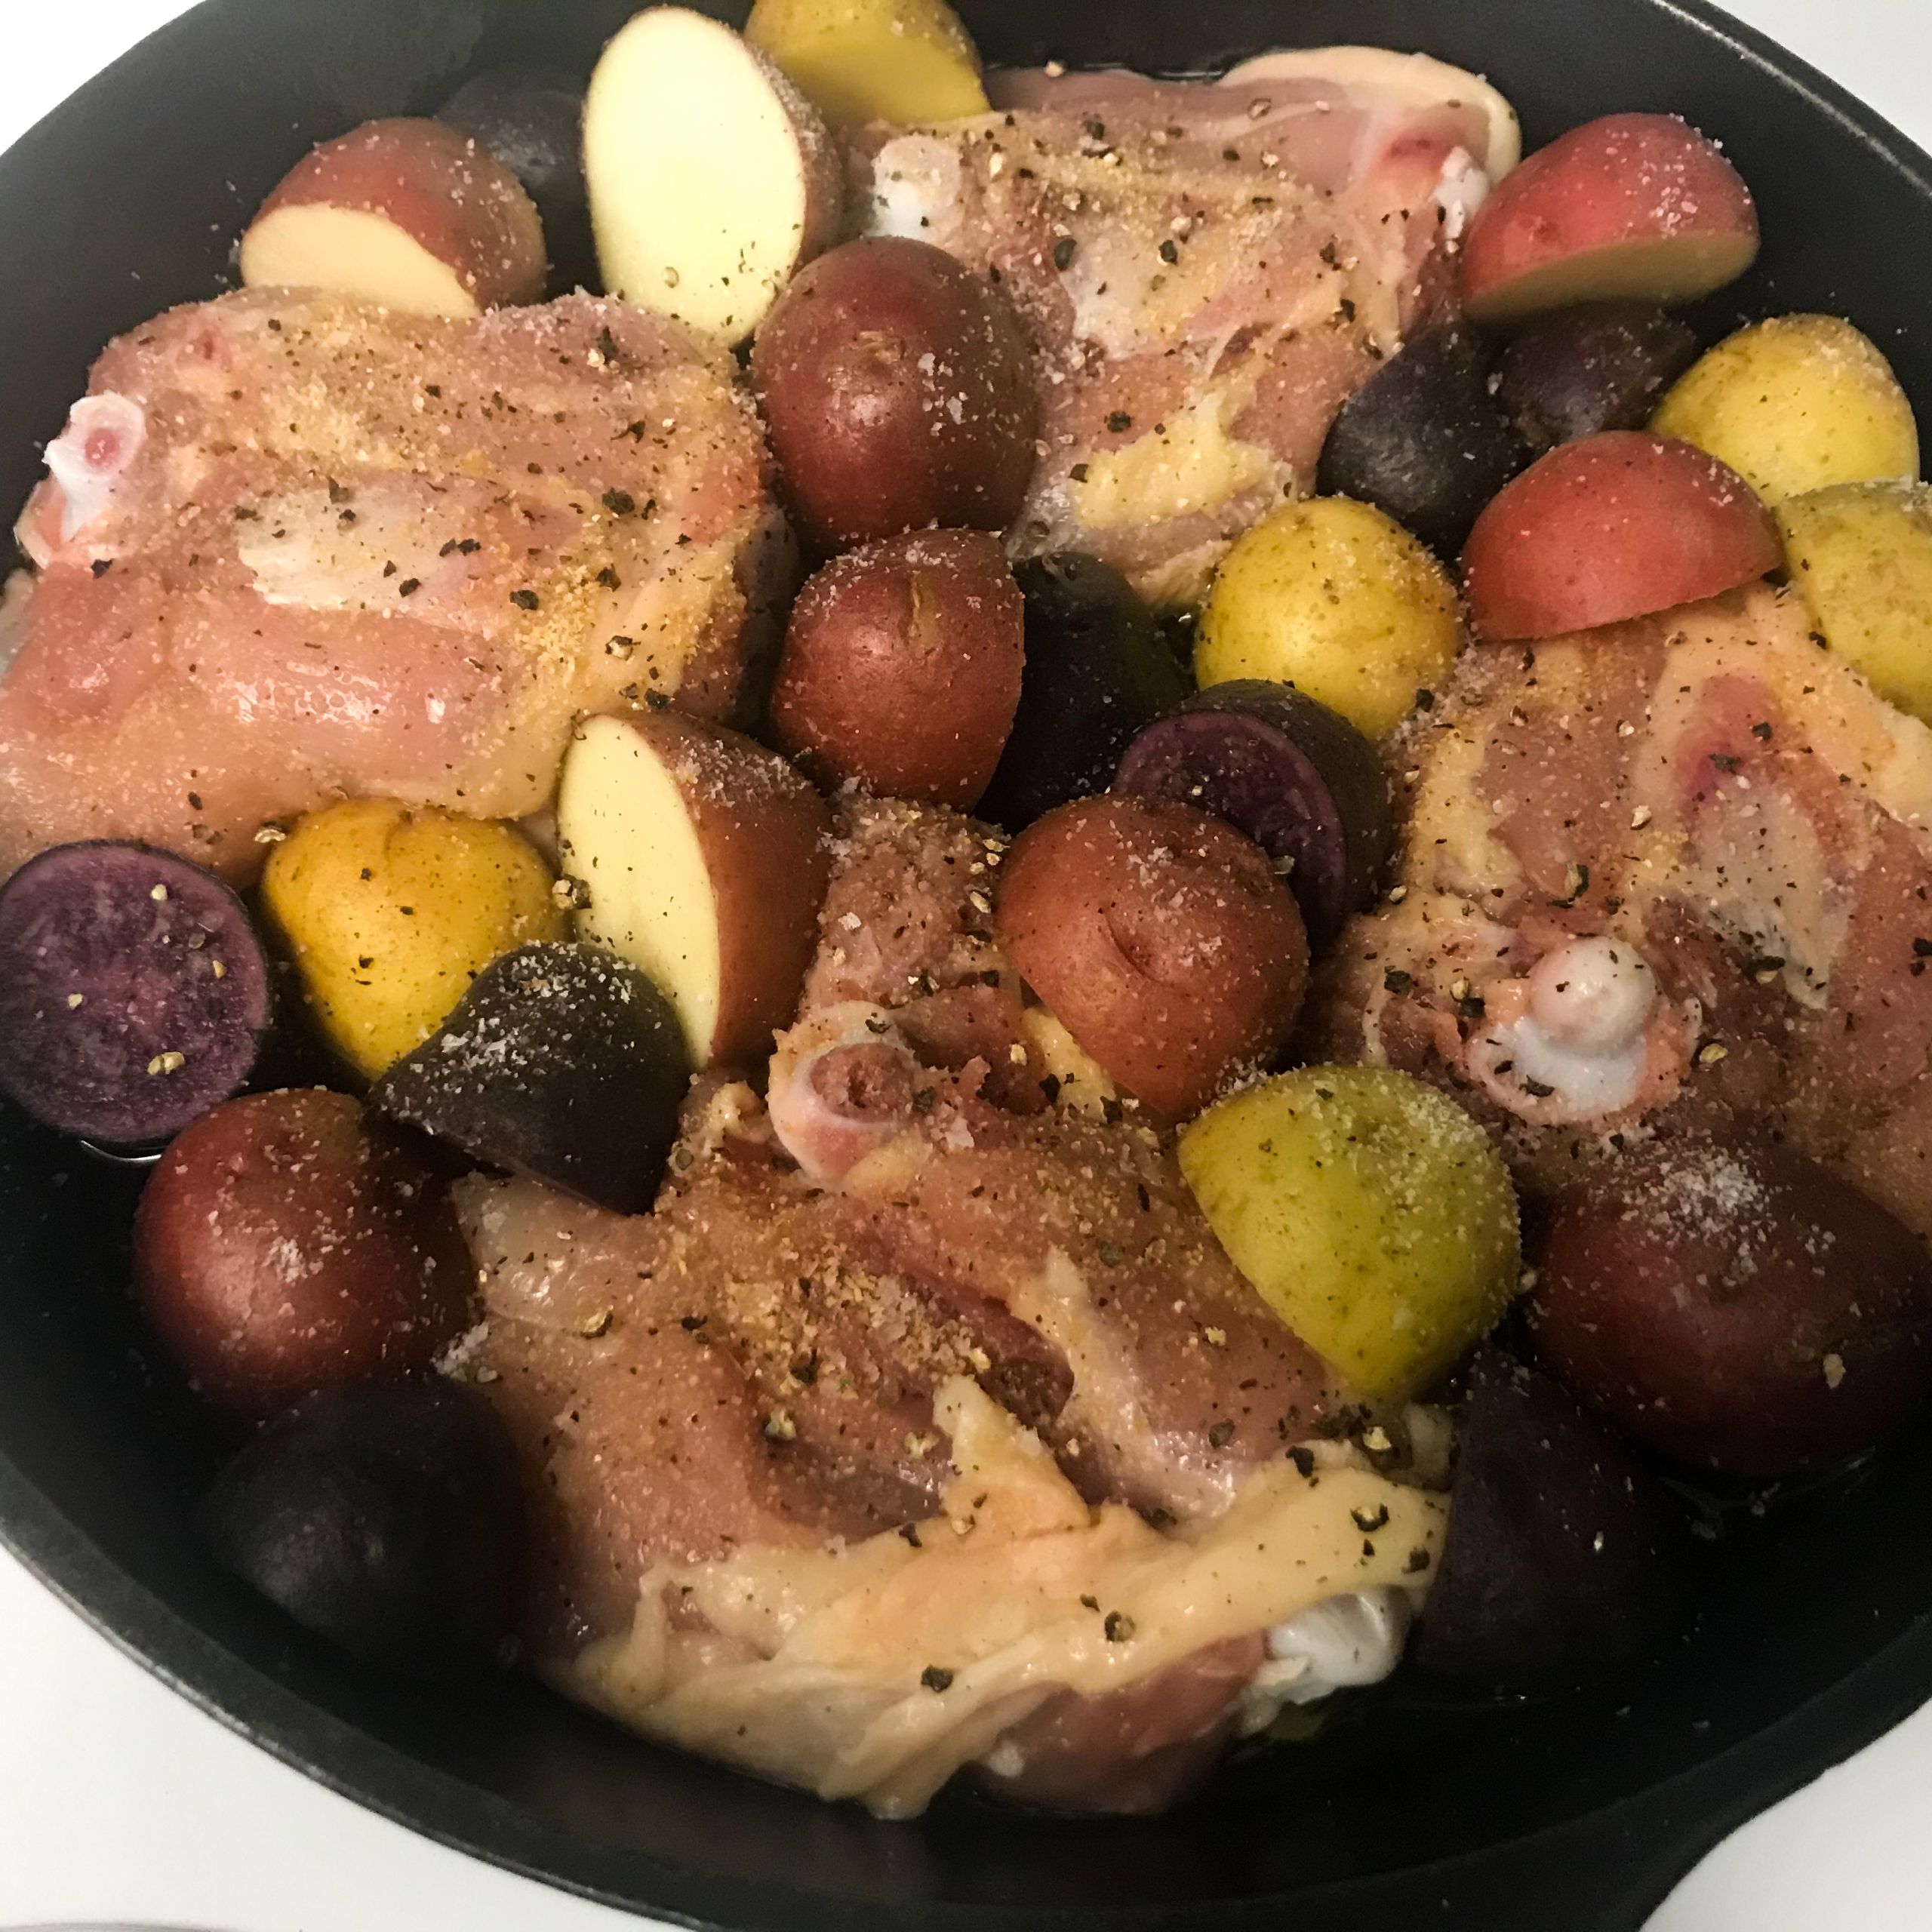 raw chicken and potatoes in a skillet | My Curated Tastes